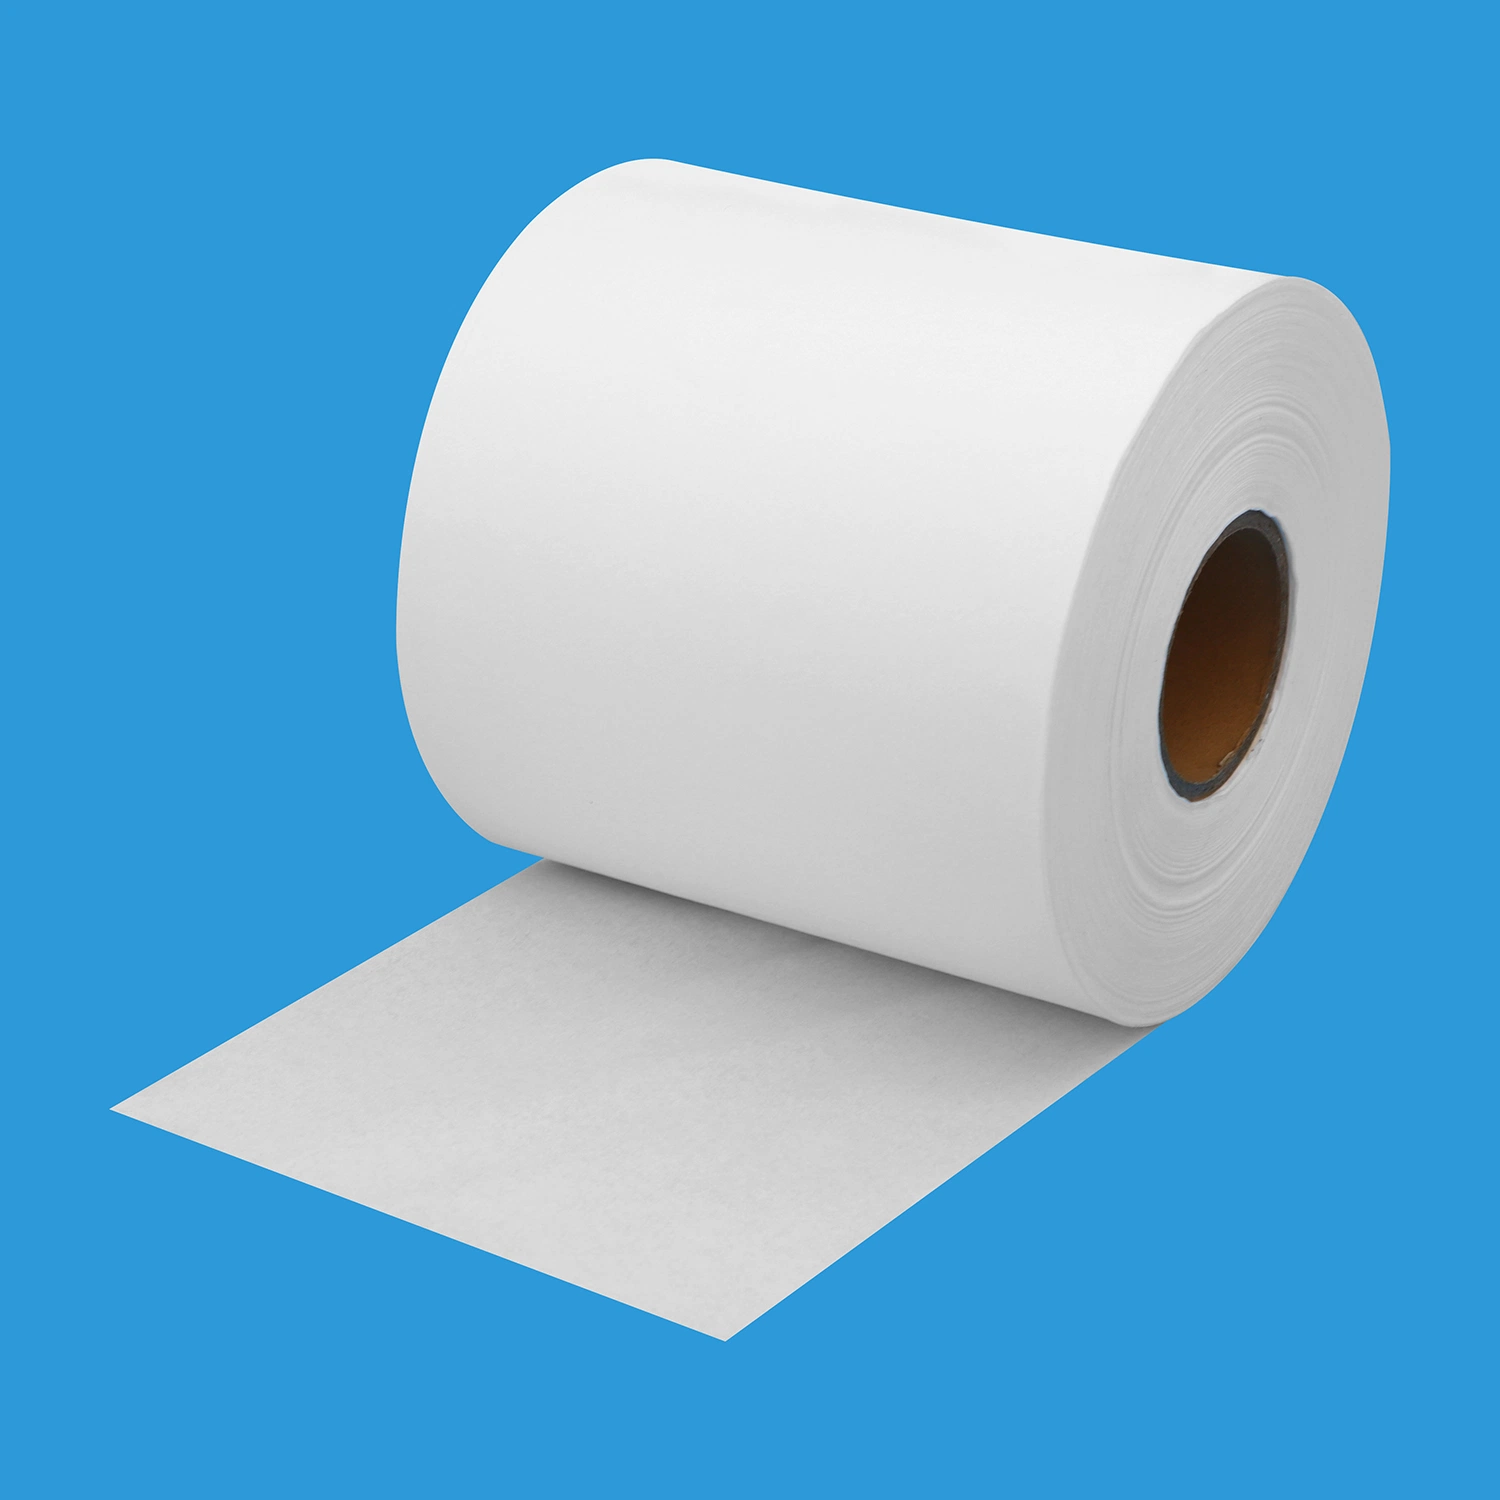 Spunlace Nonwoven Roll Best Quality Woodpulp and Polyester Non Woven Fabric Plain Non-Woven